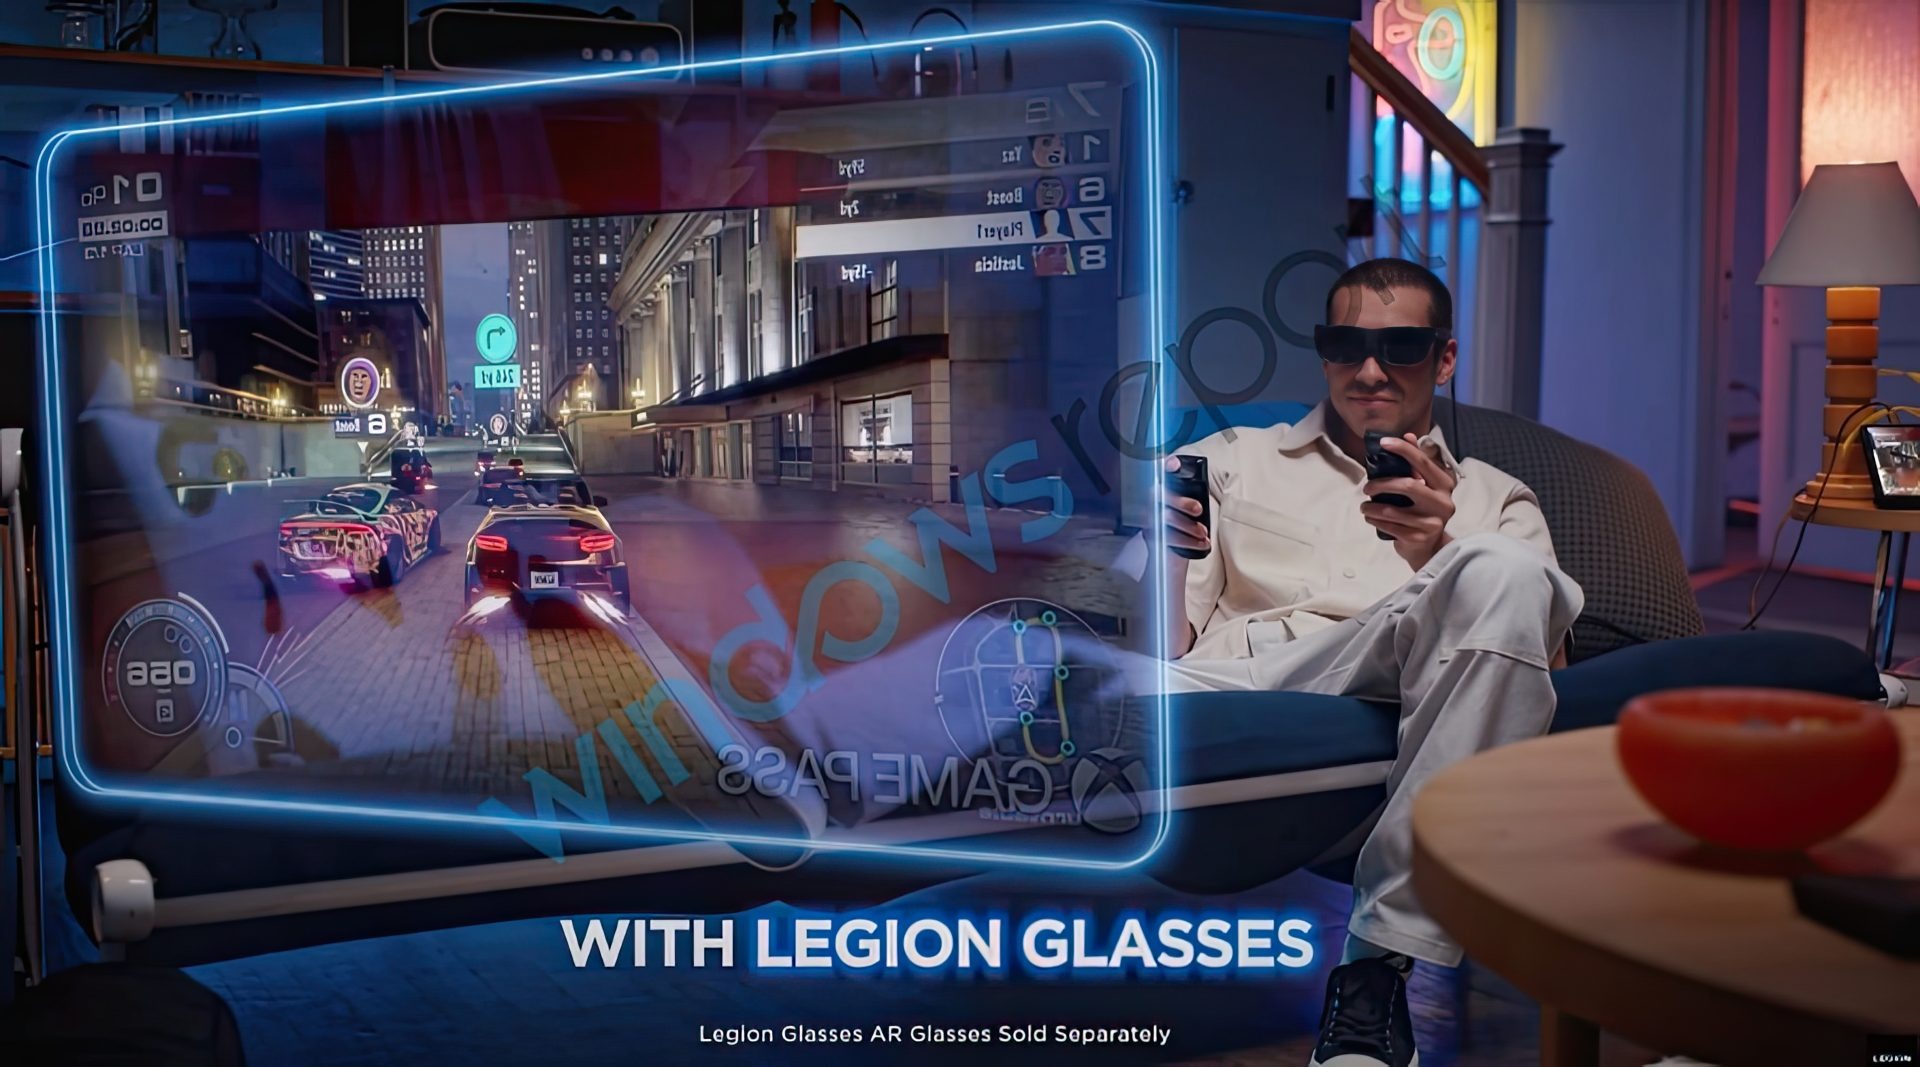 With Legion glasses